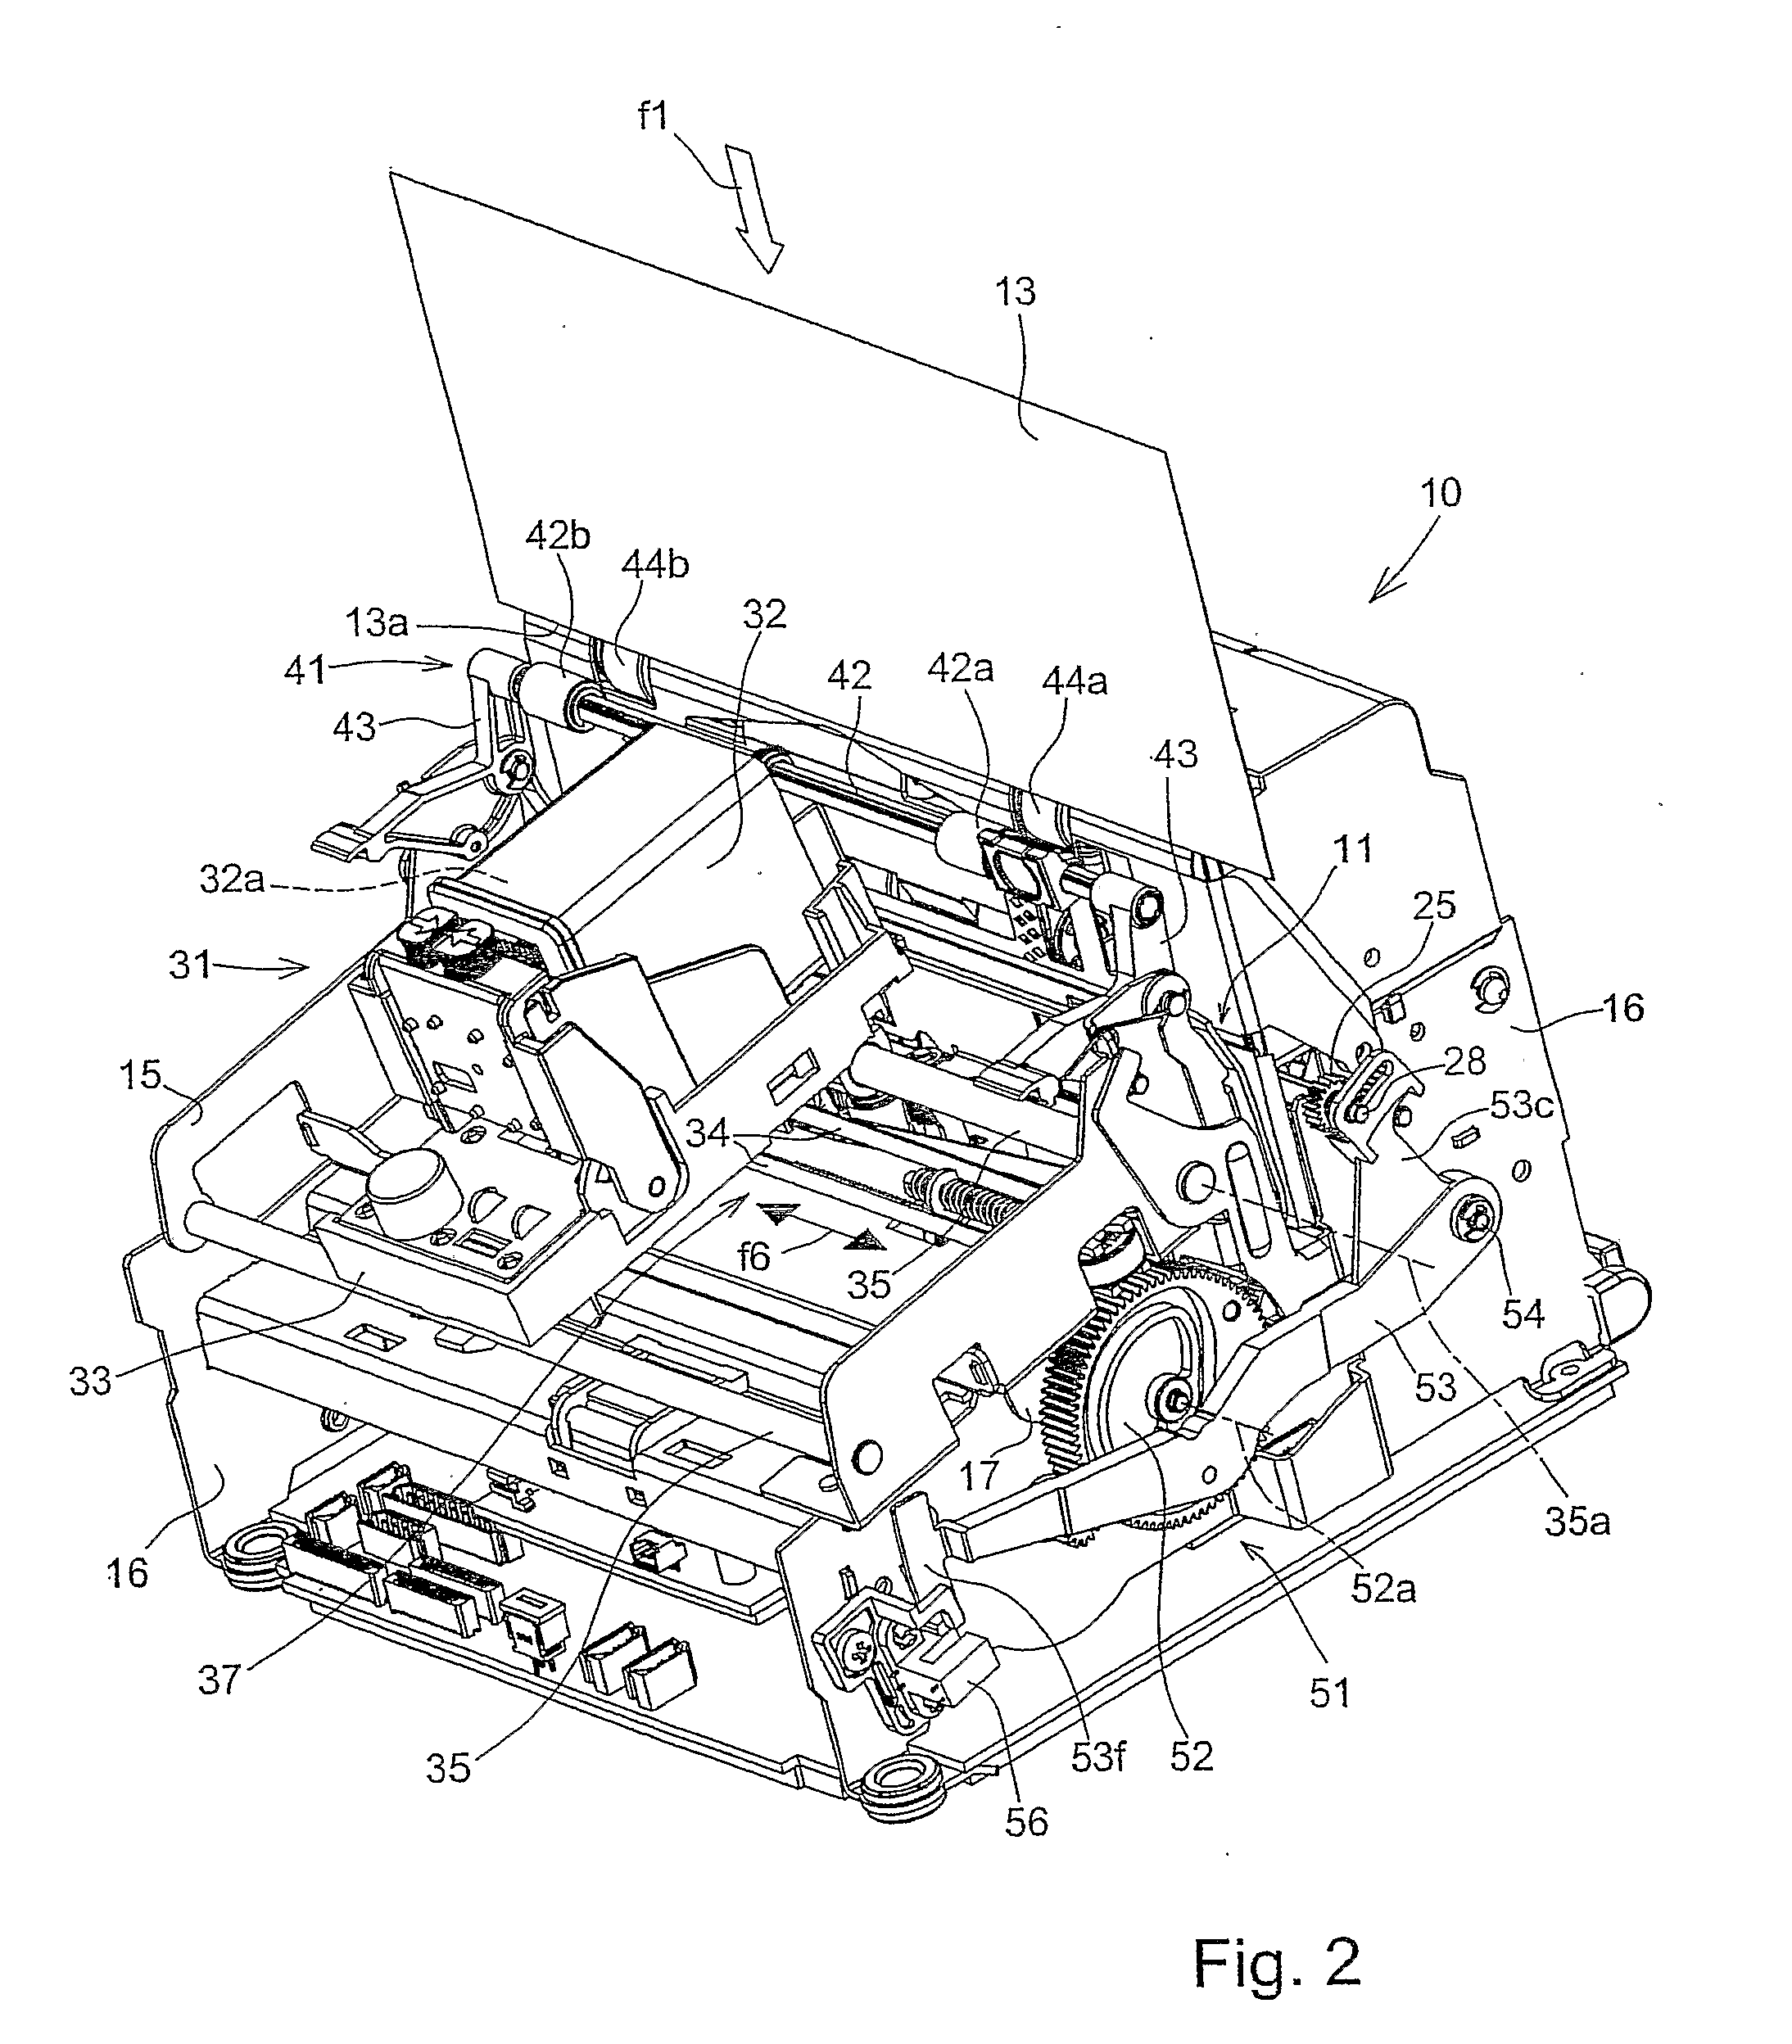 Apparatus For Processing Sheets Inserted Sertically, In Particular An Automatic Validating Machine For Documents, Such As Cheques